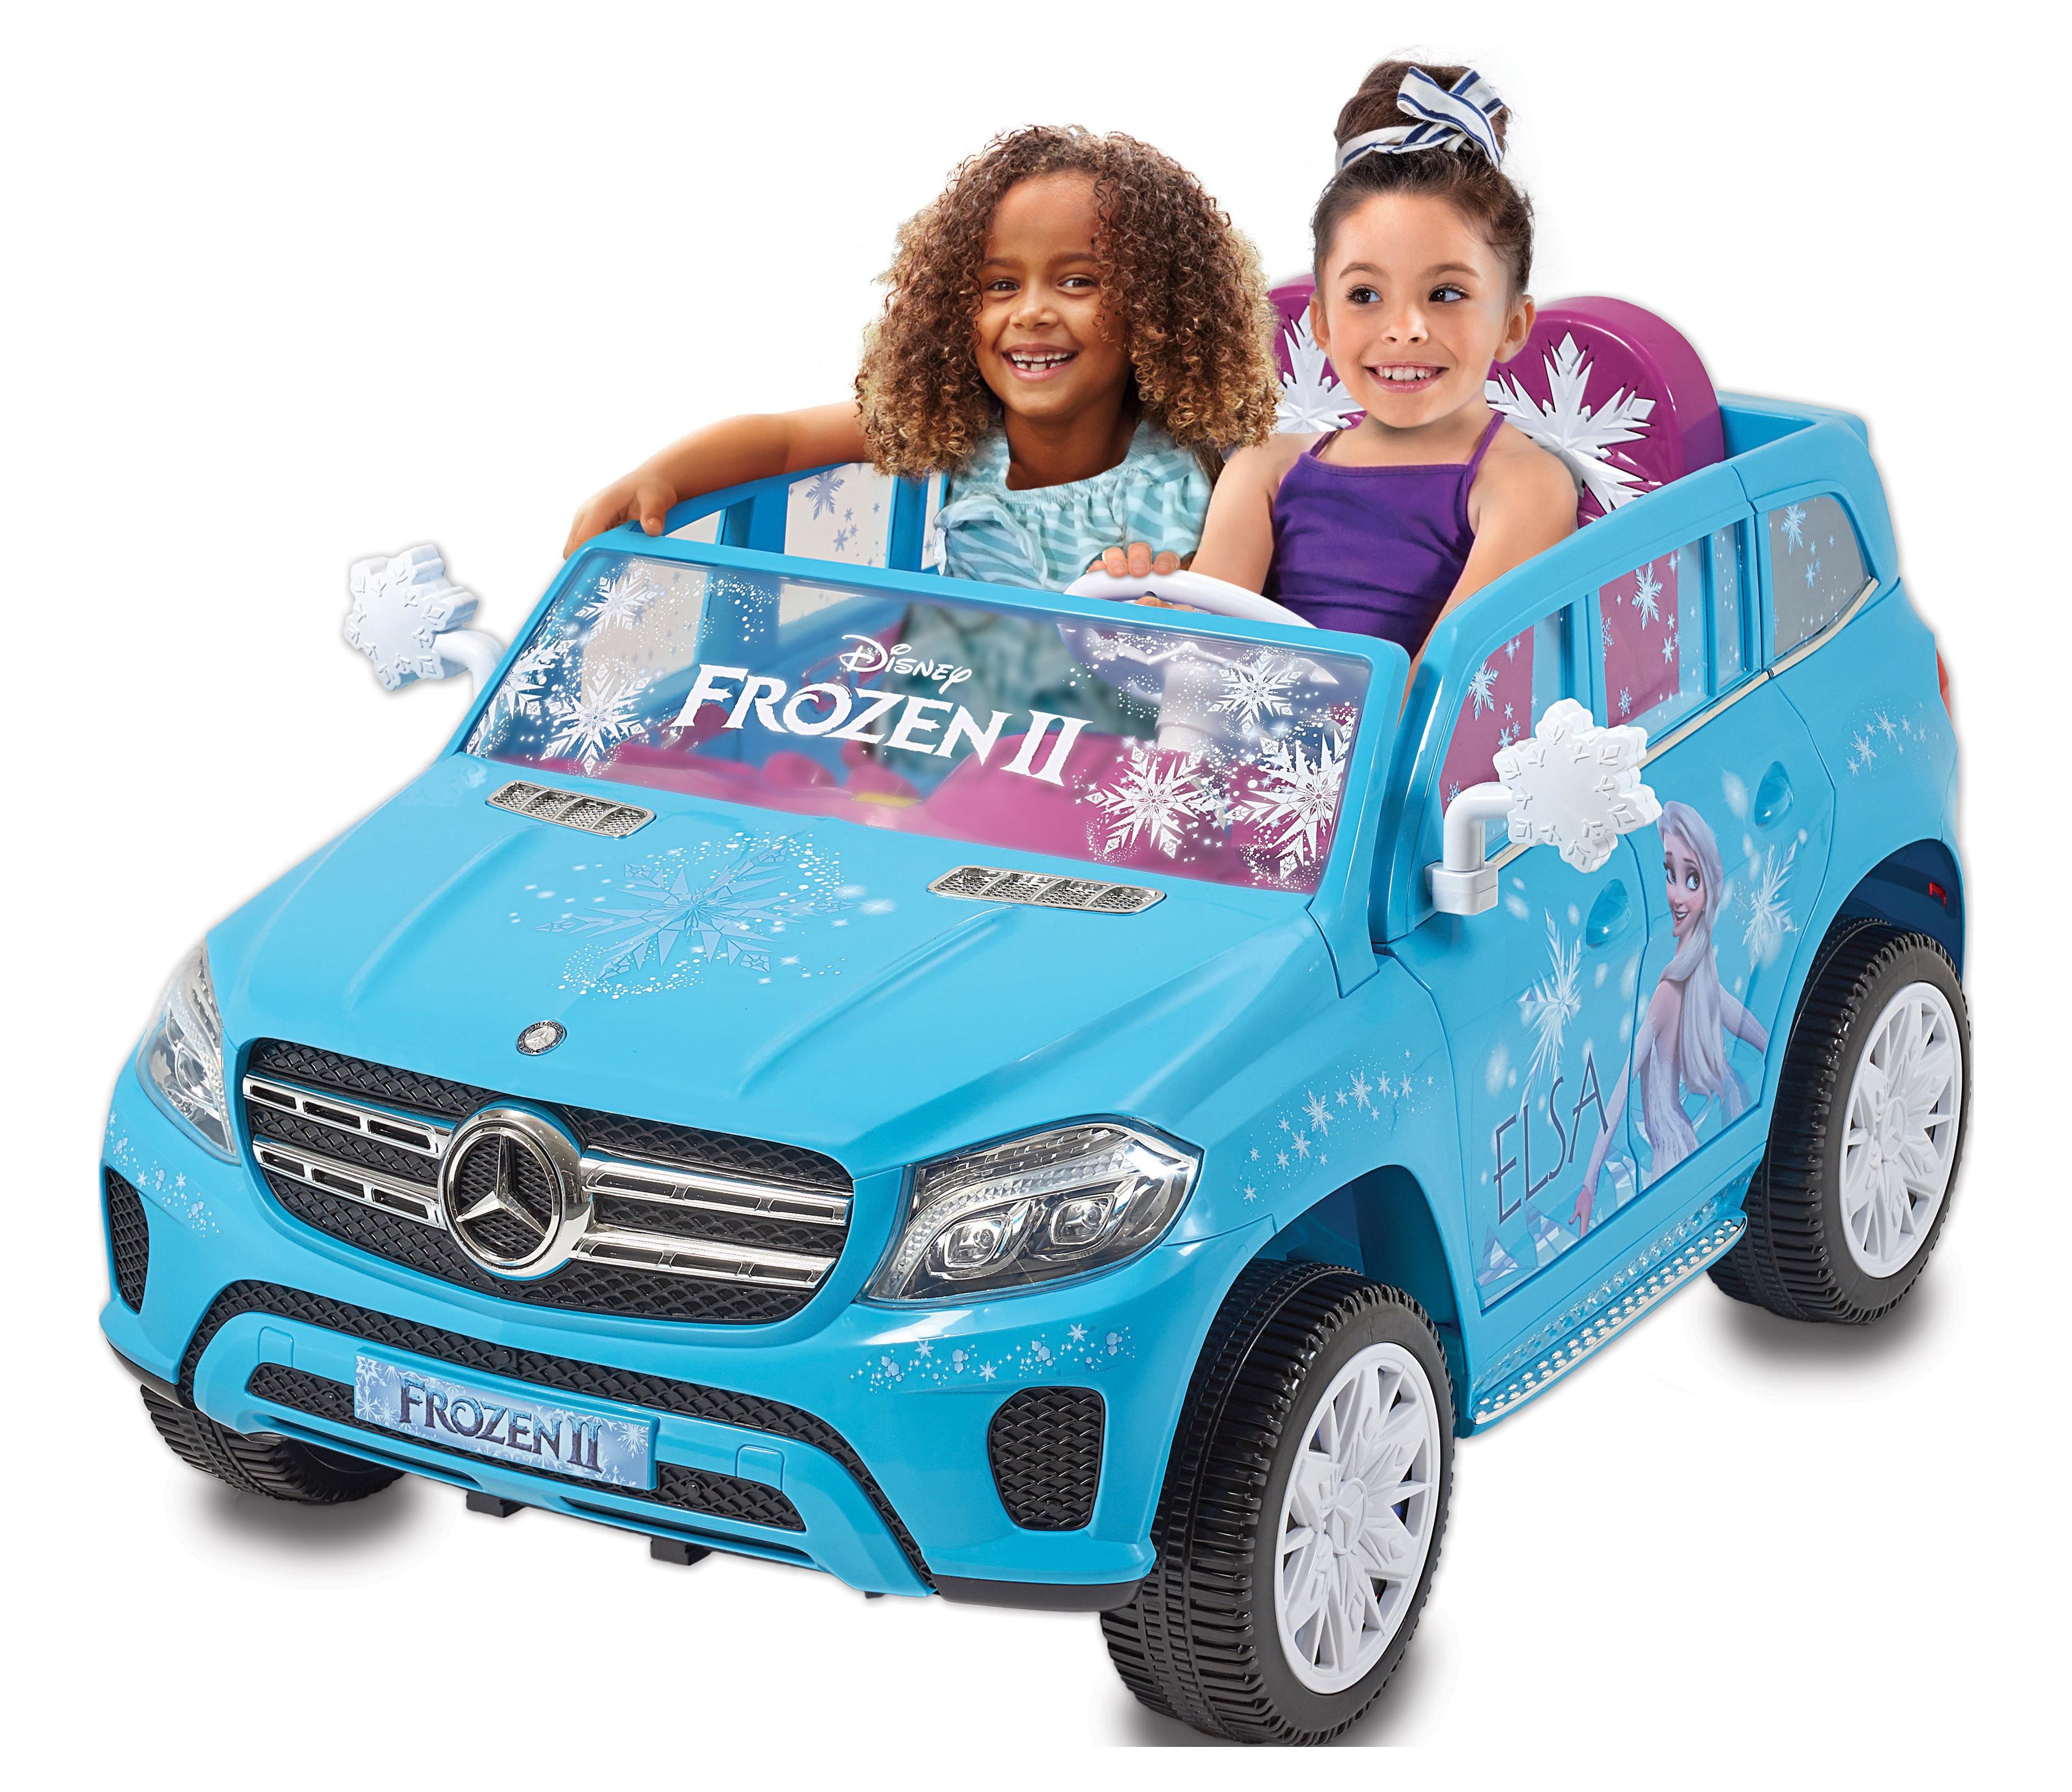 Frozen Mercedes GLS-320 12 Volt Powered Ride-on for Girls Ages 3 and up with a Maximum Speed 5 mph - image 1 of 12